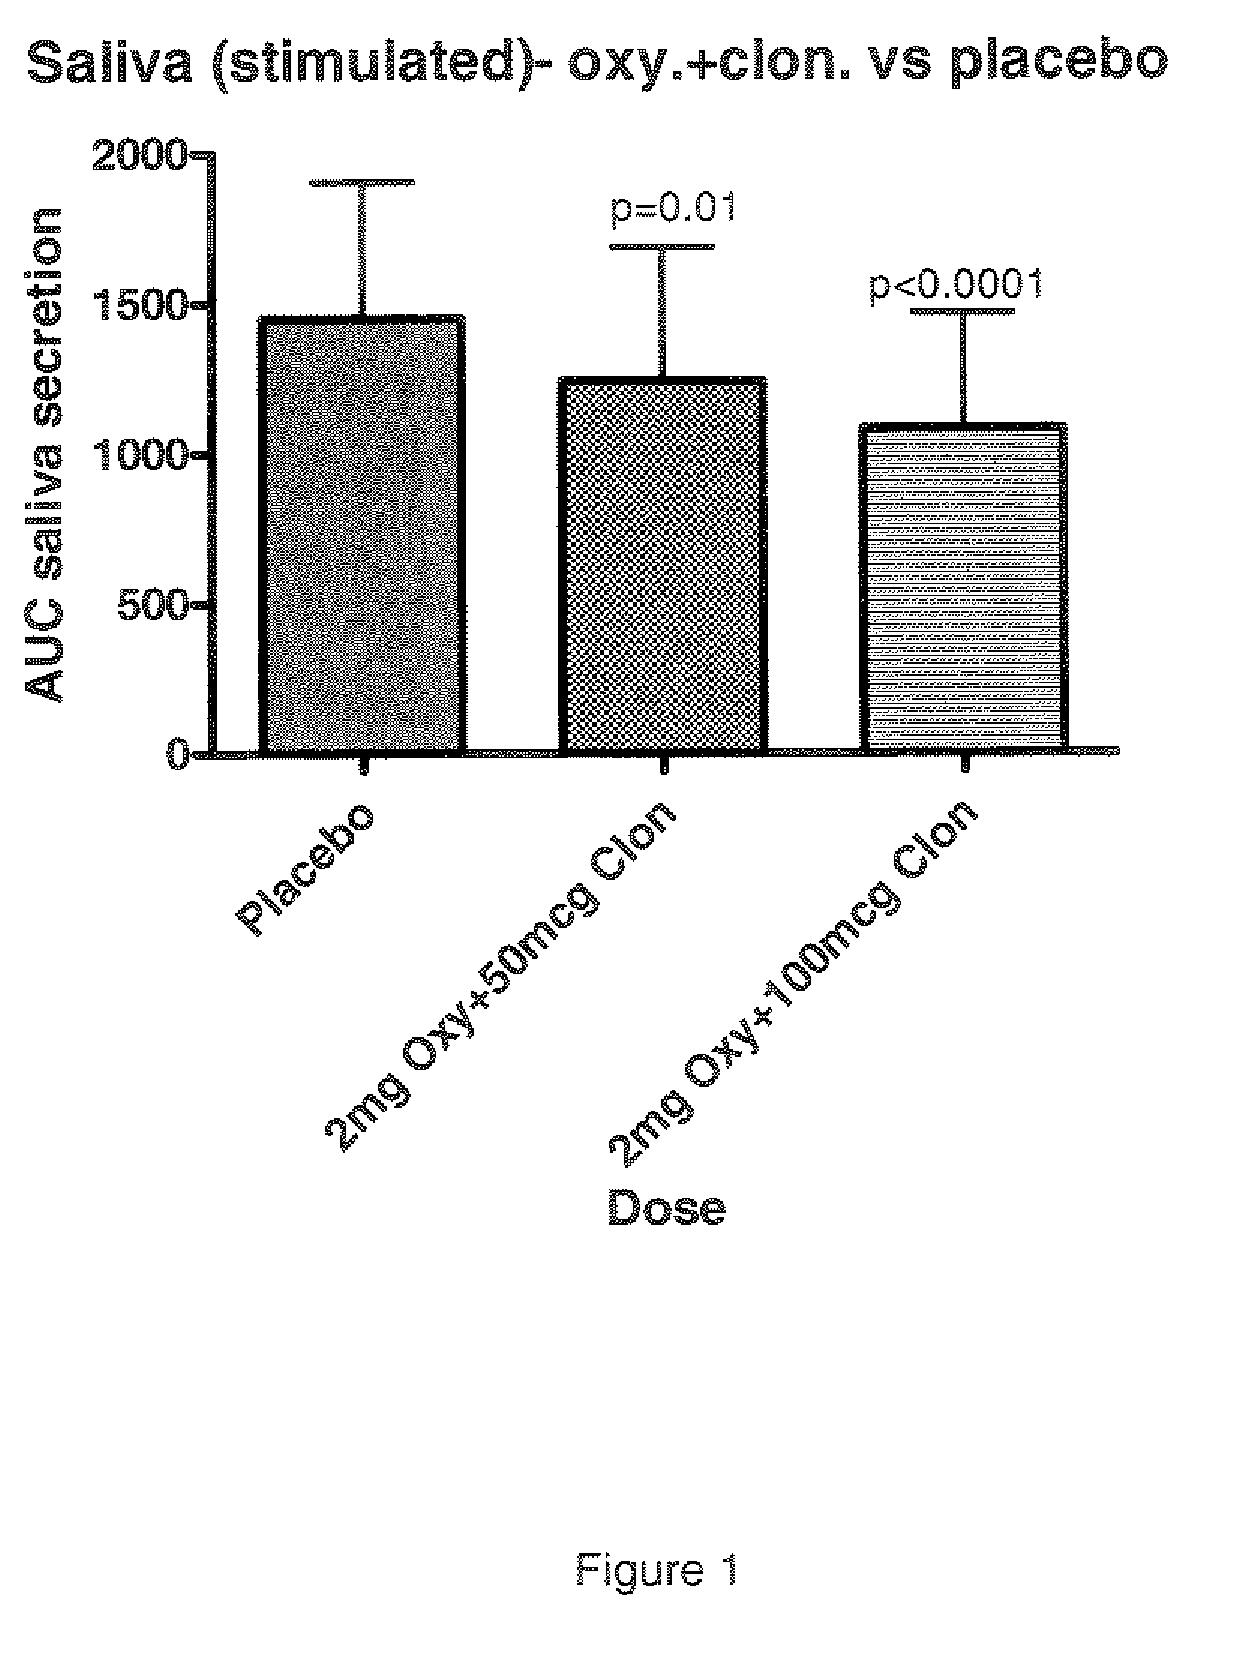 Combination of alpha-2 receptor agonist (clonidin) and Anti-muscarinic agent (oxybutynin) for the treatment of sialorrhoea